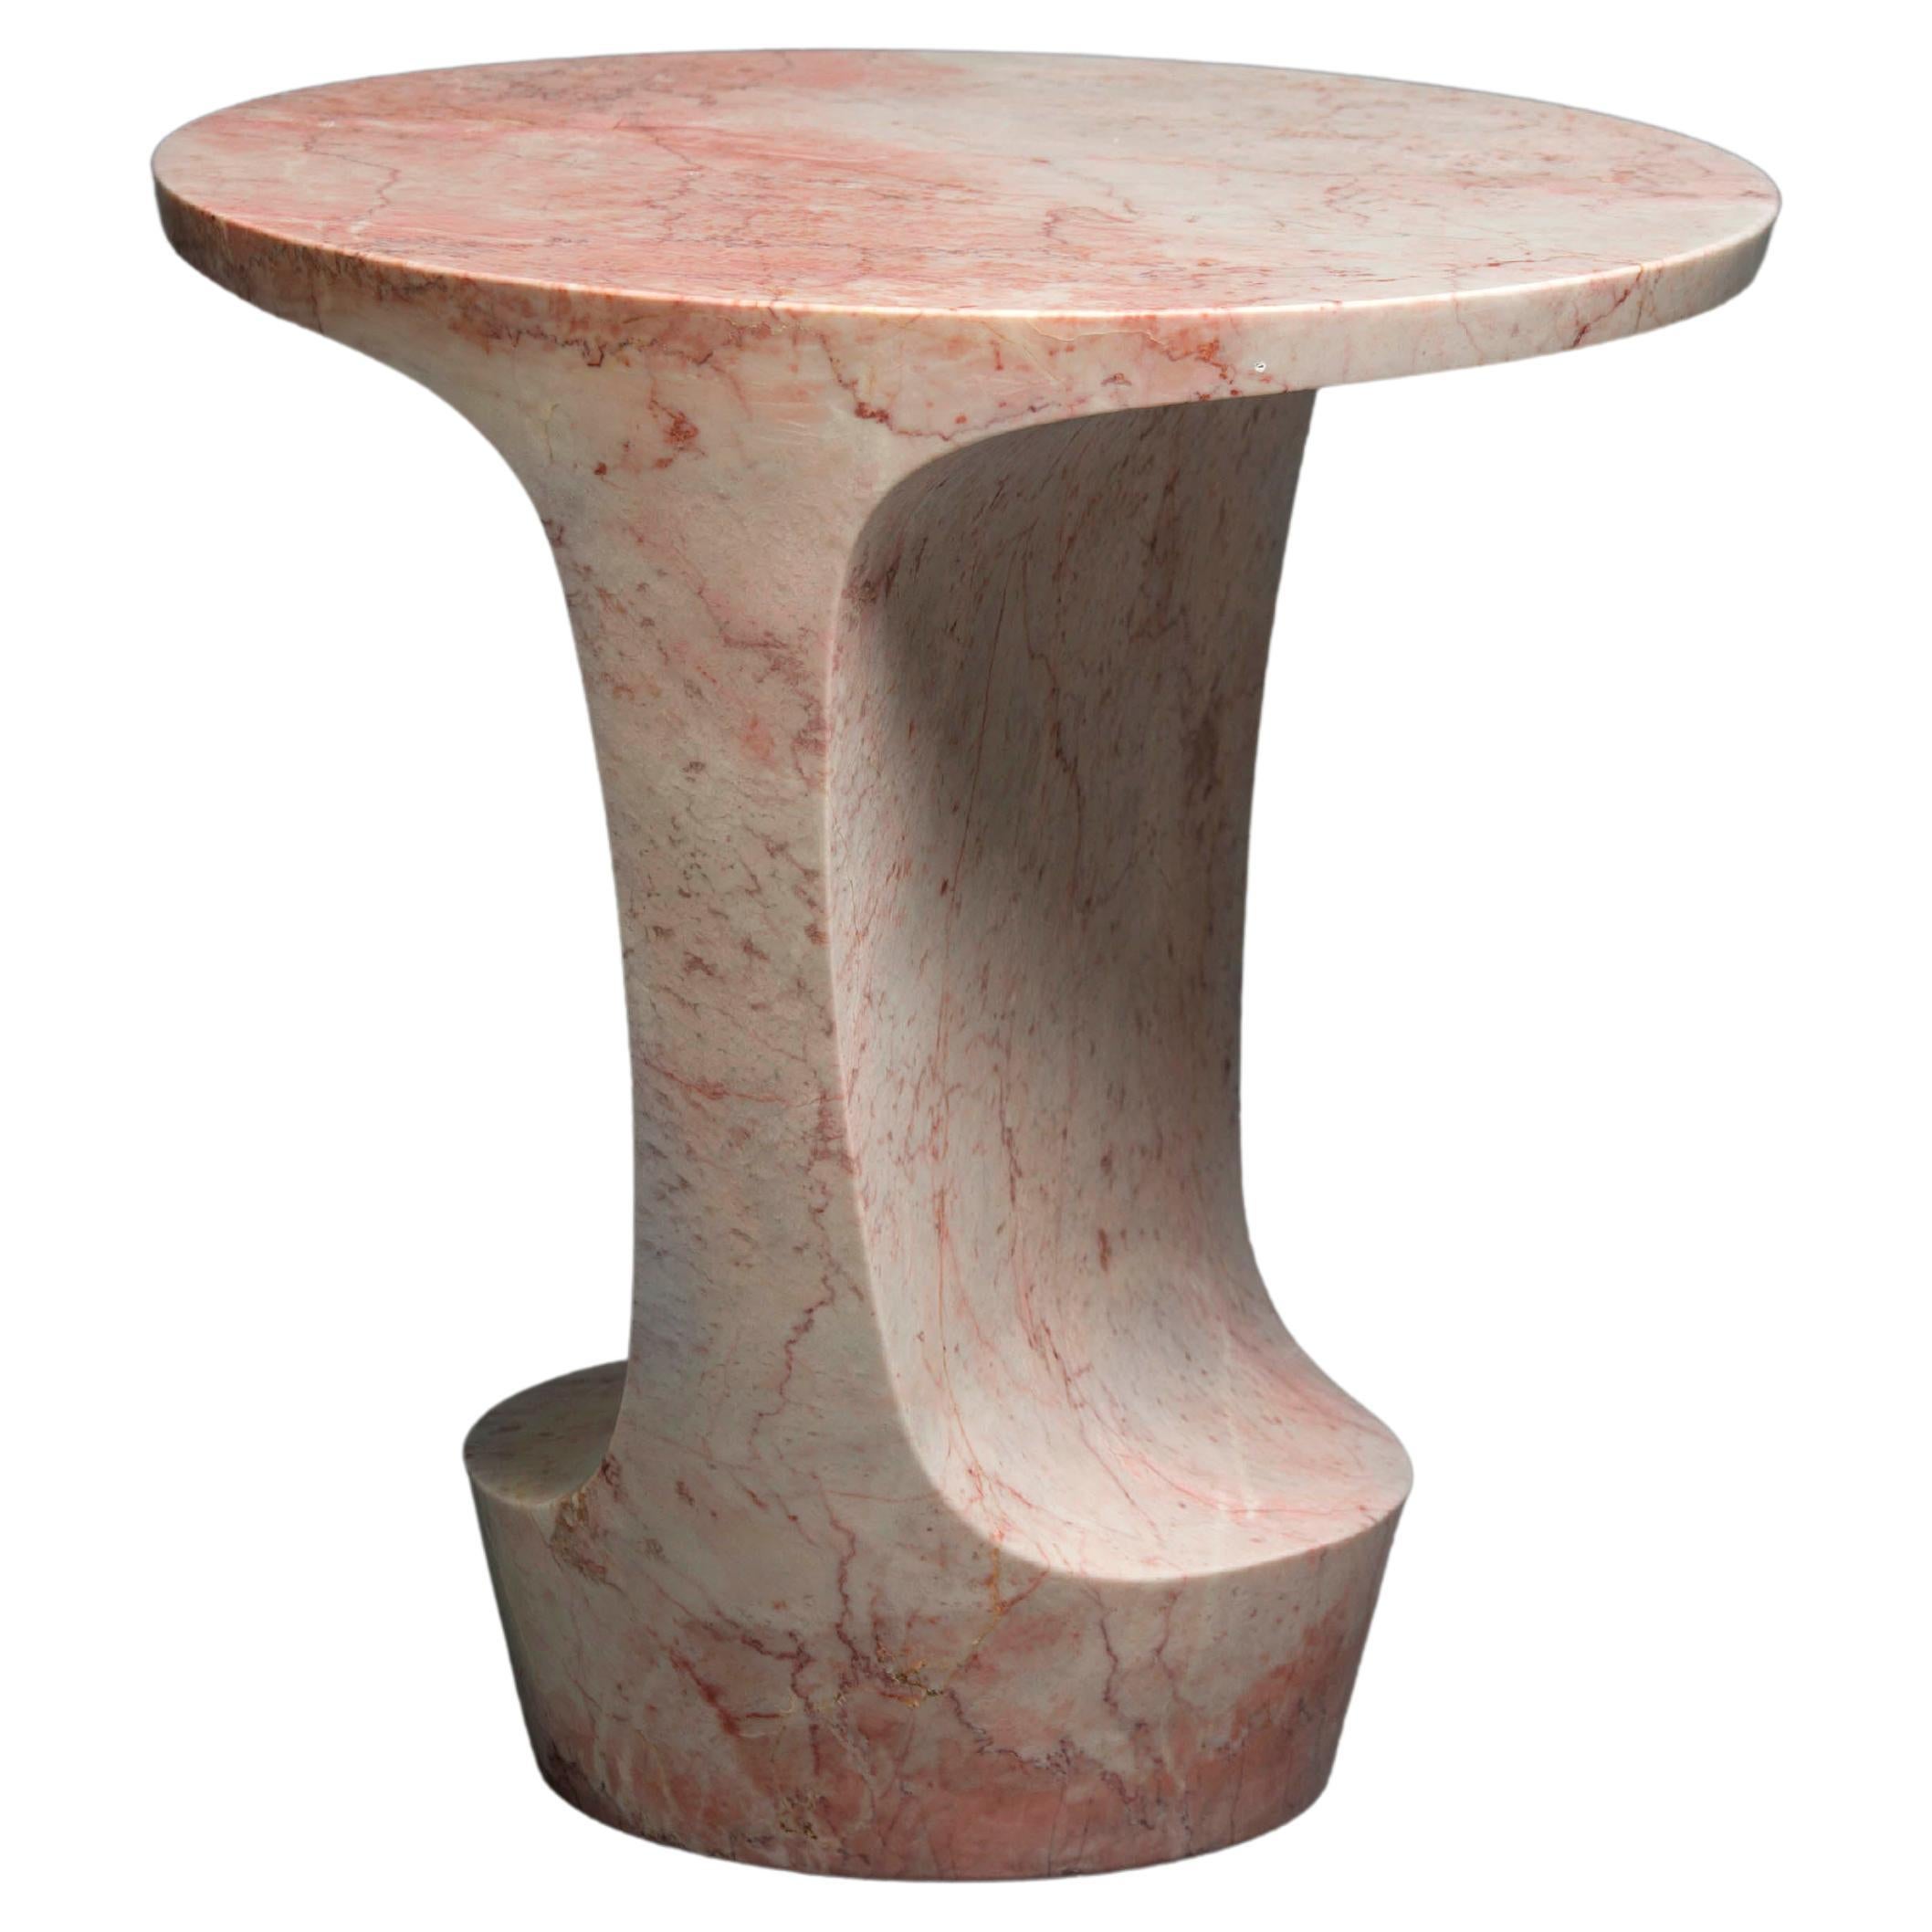 Atlas large Table in Rossata Pink Marble by Adolfo Abejon for Formar For Sale